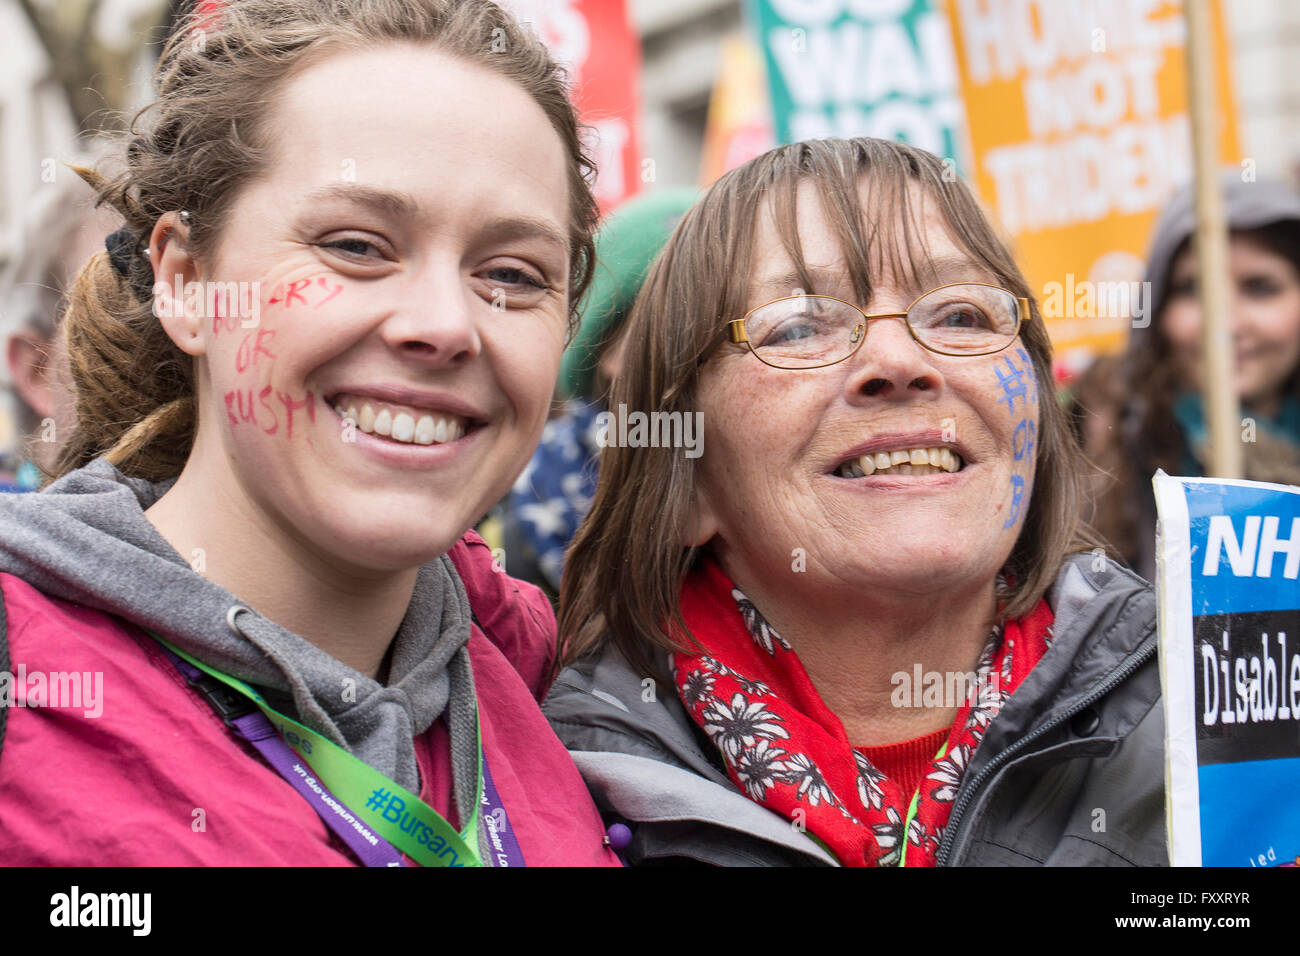 A young nurse marching against proposed cuts to nursing education marches with her mother at the anti-austerity march. Stock Photo